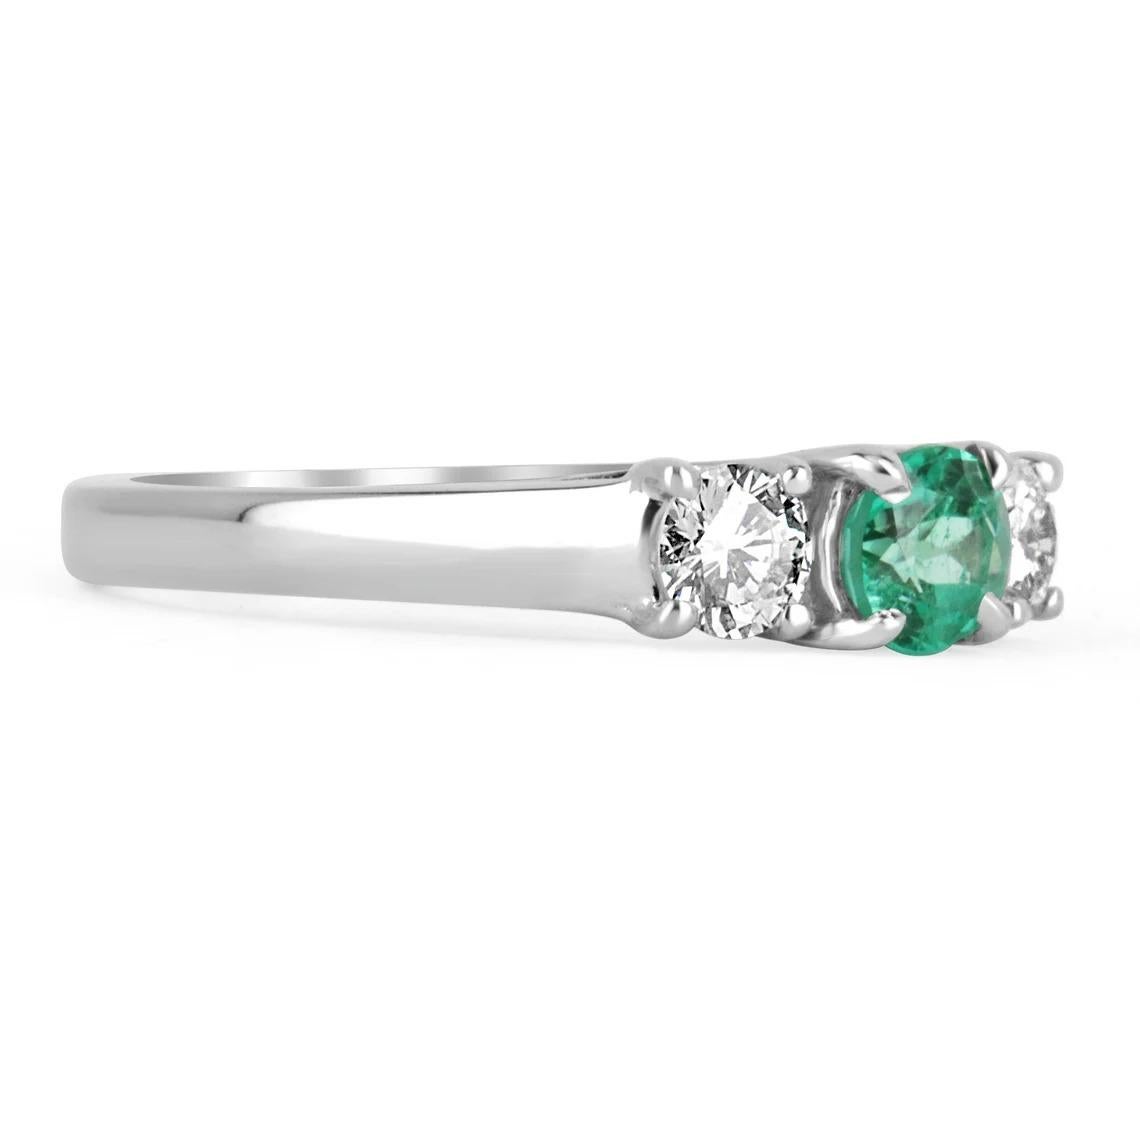 A classic, 14k solid gold natural emerald & diamond three stone engagement ring. A timeless engagement ring featuring a genuine round emerald flanked by two brilliant round diamonds. The Colombian emerald has very good qualities as it is mined from